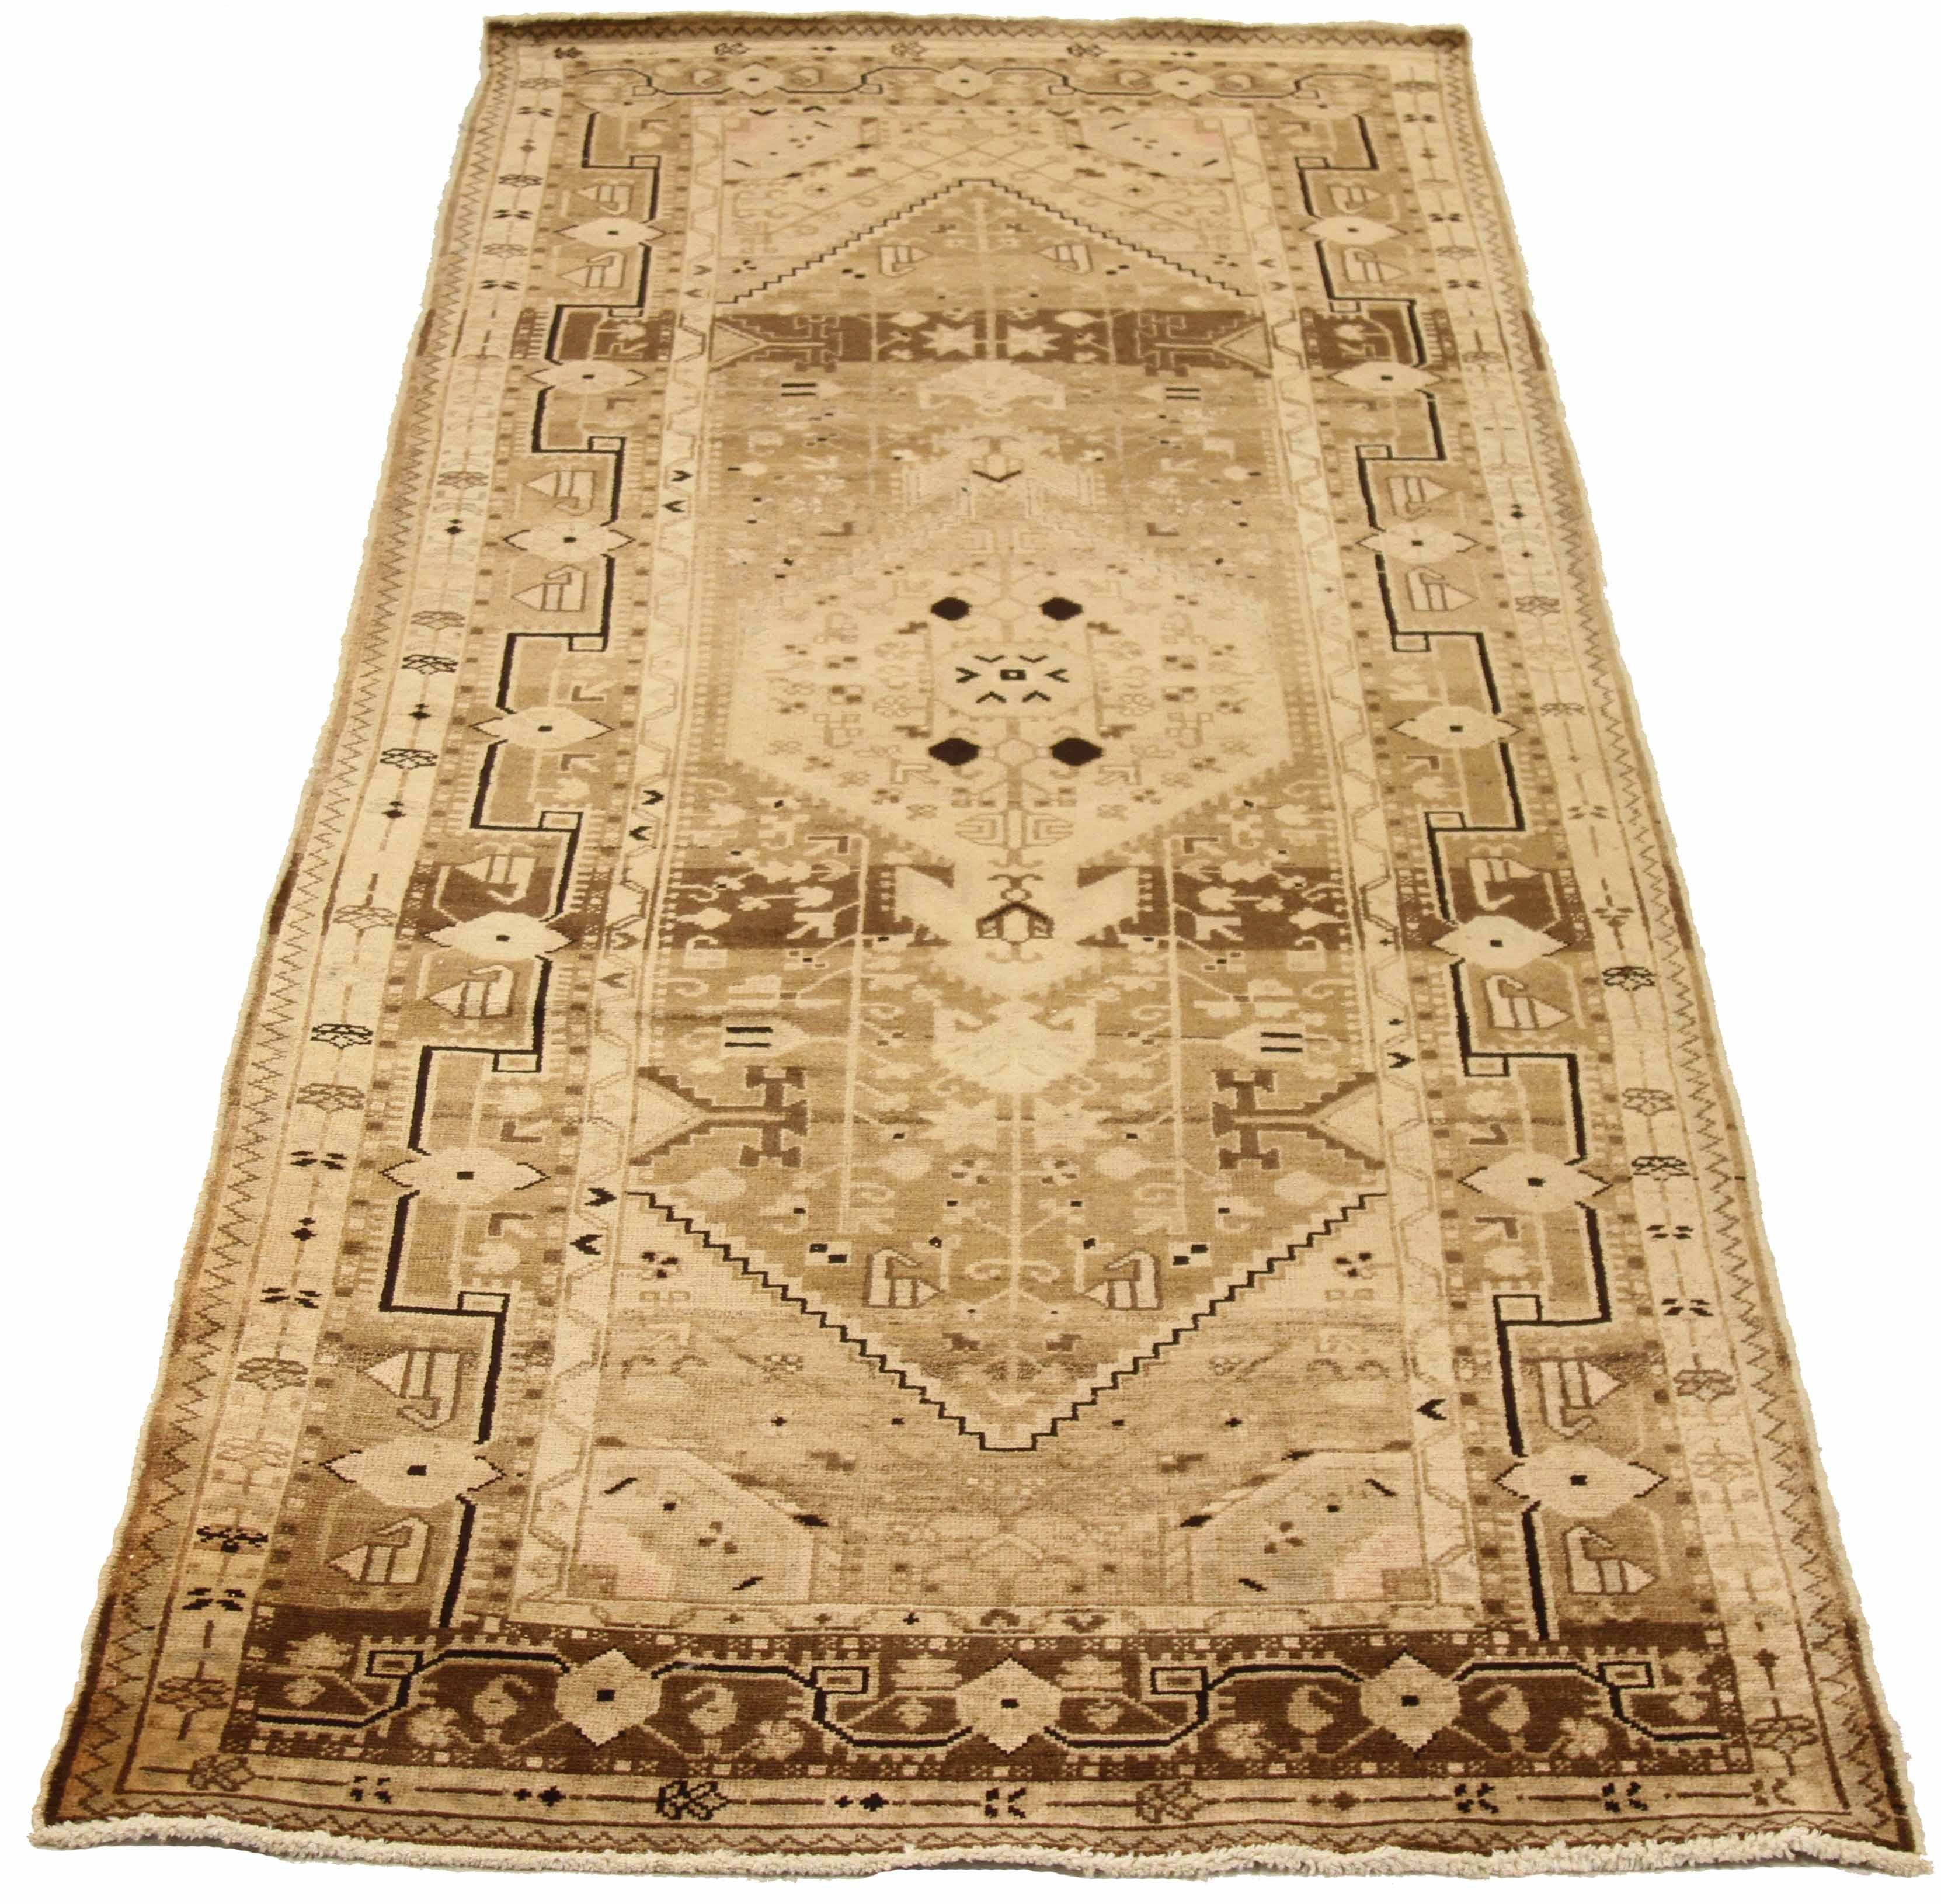 Antique Persian area rug handwoven from the finest sheep’s wool. It’s colored with all-natural vegetable dyes that are safe for humans and pets. It’s a traditional Toiserkan design handwoven by expert artisans. It’s a lovely area rug that can be